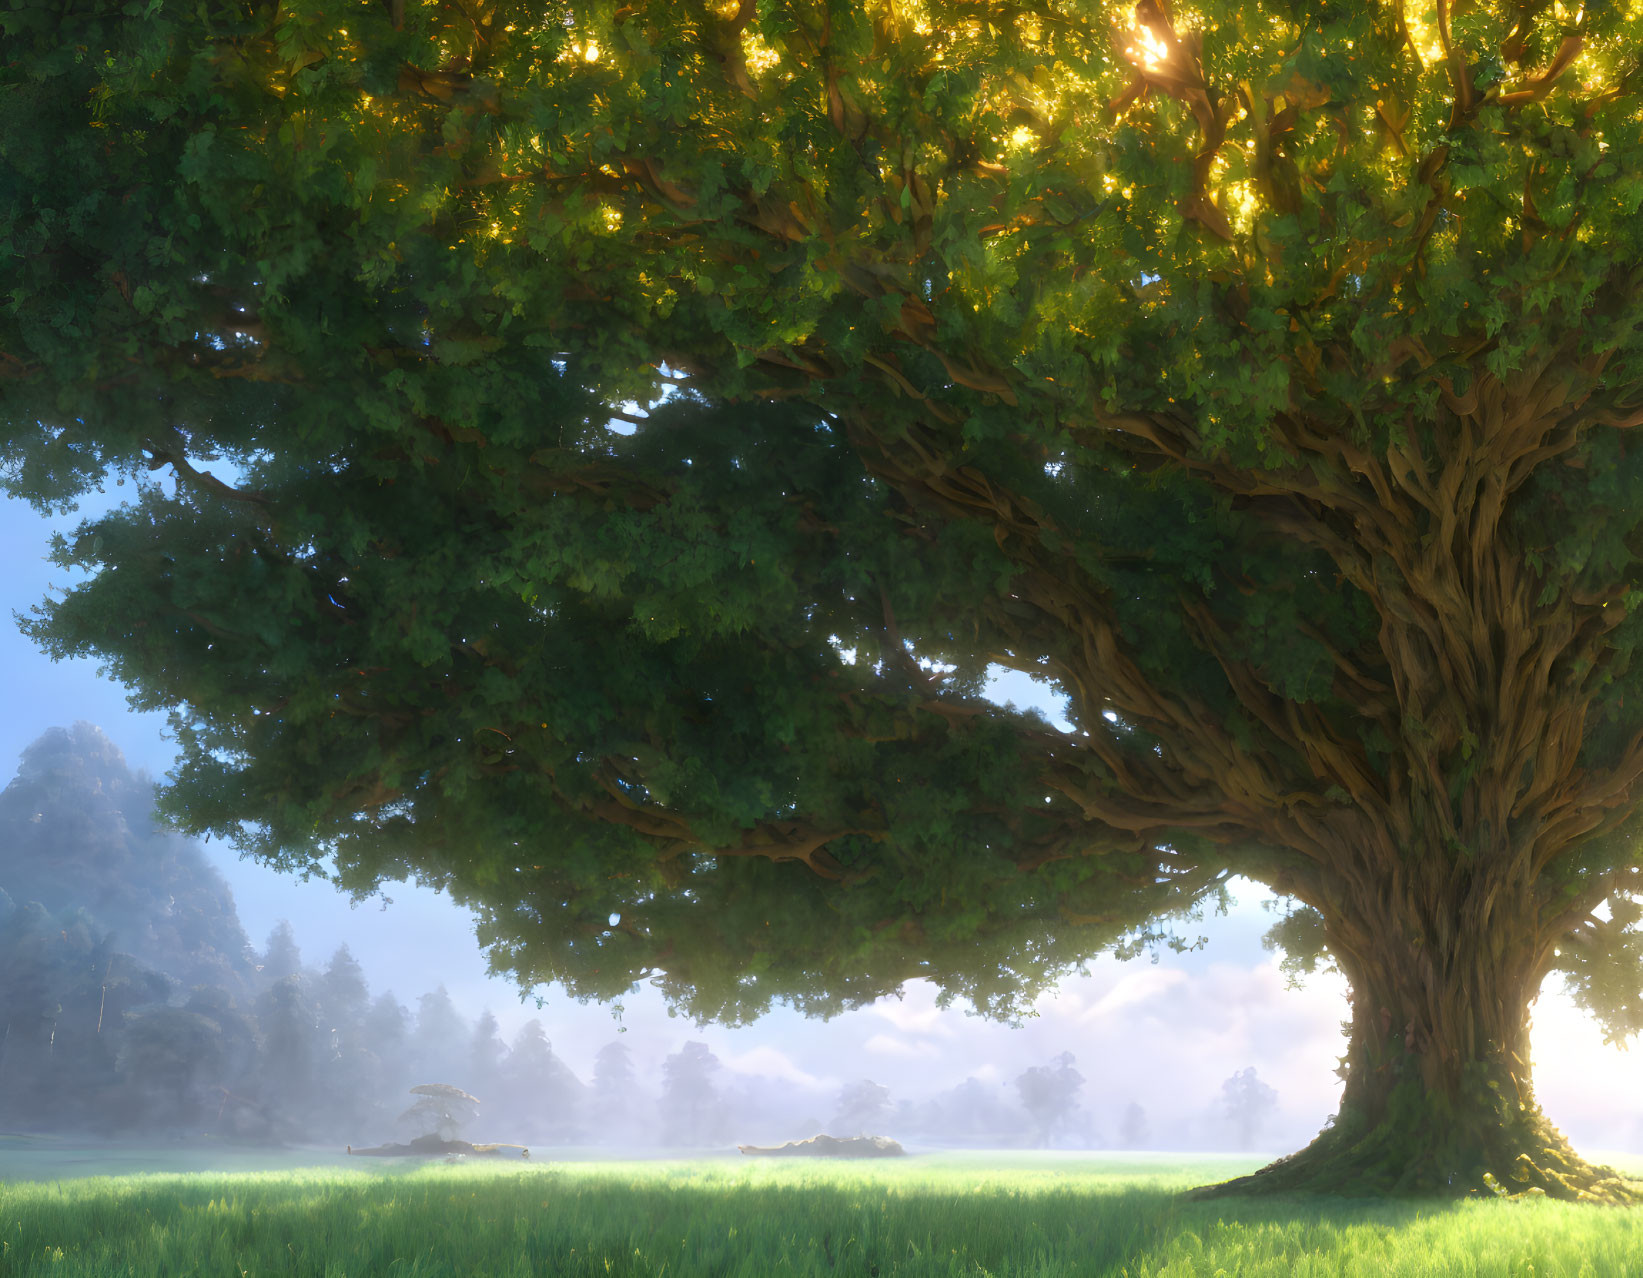 Majestic tree with lush foliage in soft sunlight over verdant meadow